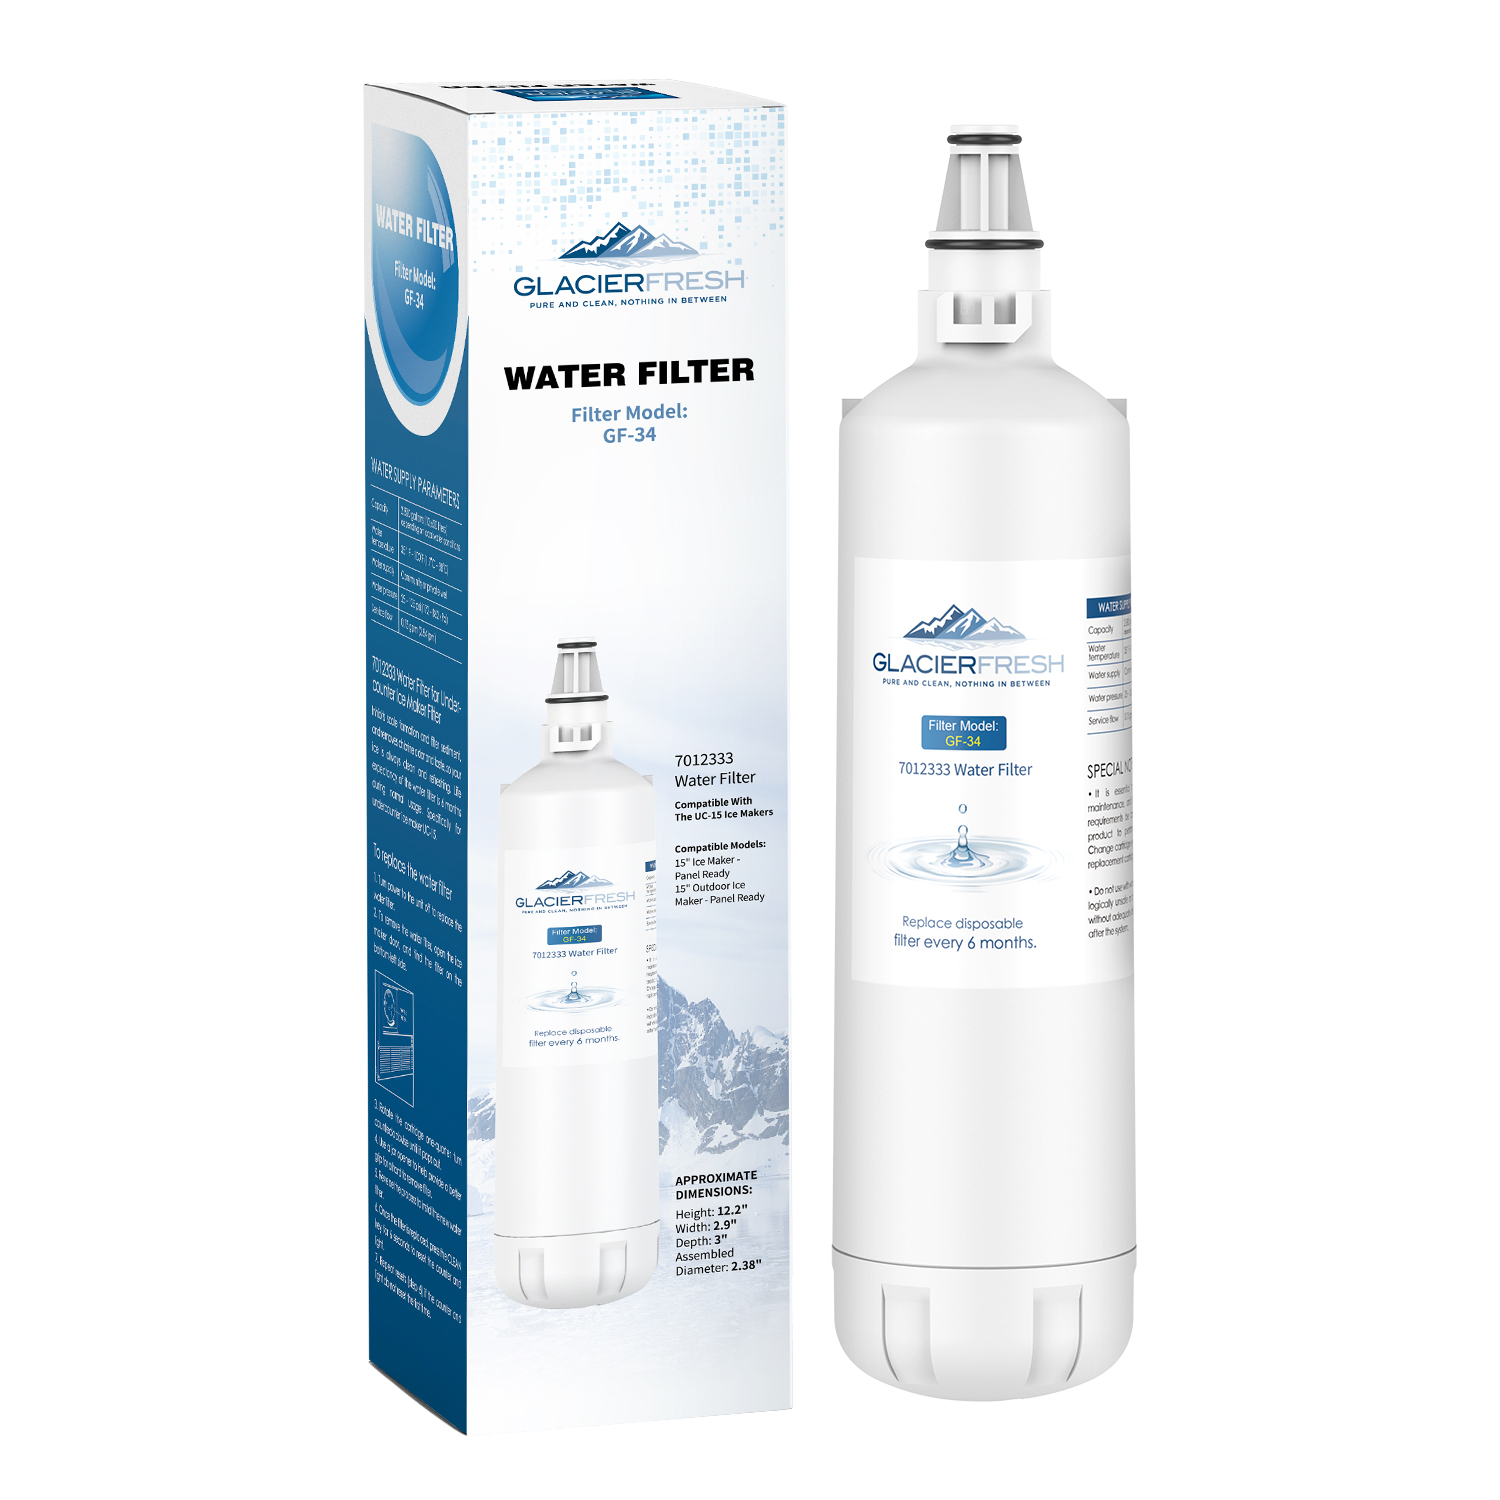 GLACIER FRESH 7012333 Ice Maker Water Filter, Compatible with Sub-Zero 7012333 Water Filter, UC-15 Ice Maker Water Filter Replacement, Manitowoc K00374 (1 Pack) - image 1 of 6